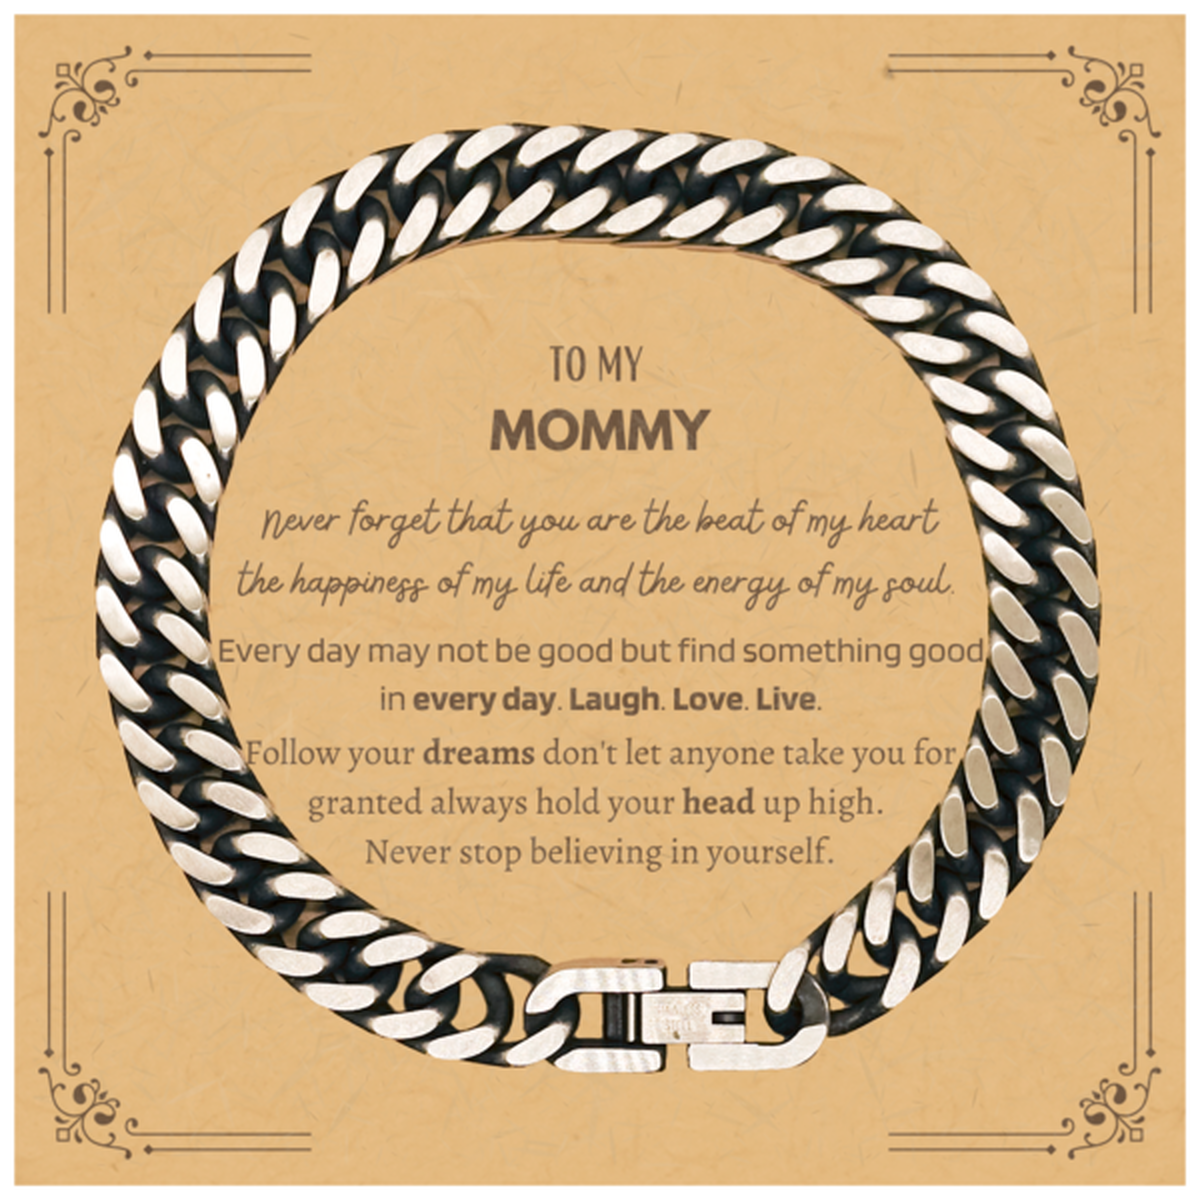 To My Mommy Message Card Gifts, Christmas Mommy Cuban Link Chain Bracelet Present, Birthday Unique Motivational For Mommy, To My Mommy Never forget that you are the beat of my heart the happiness of my life and the energy of my soul